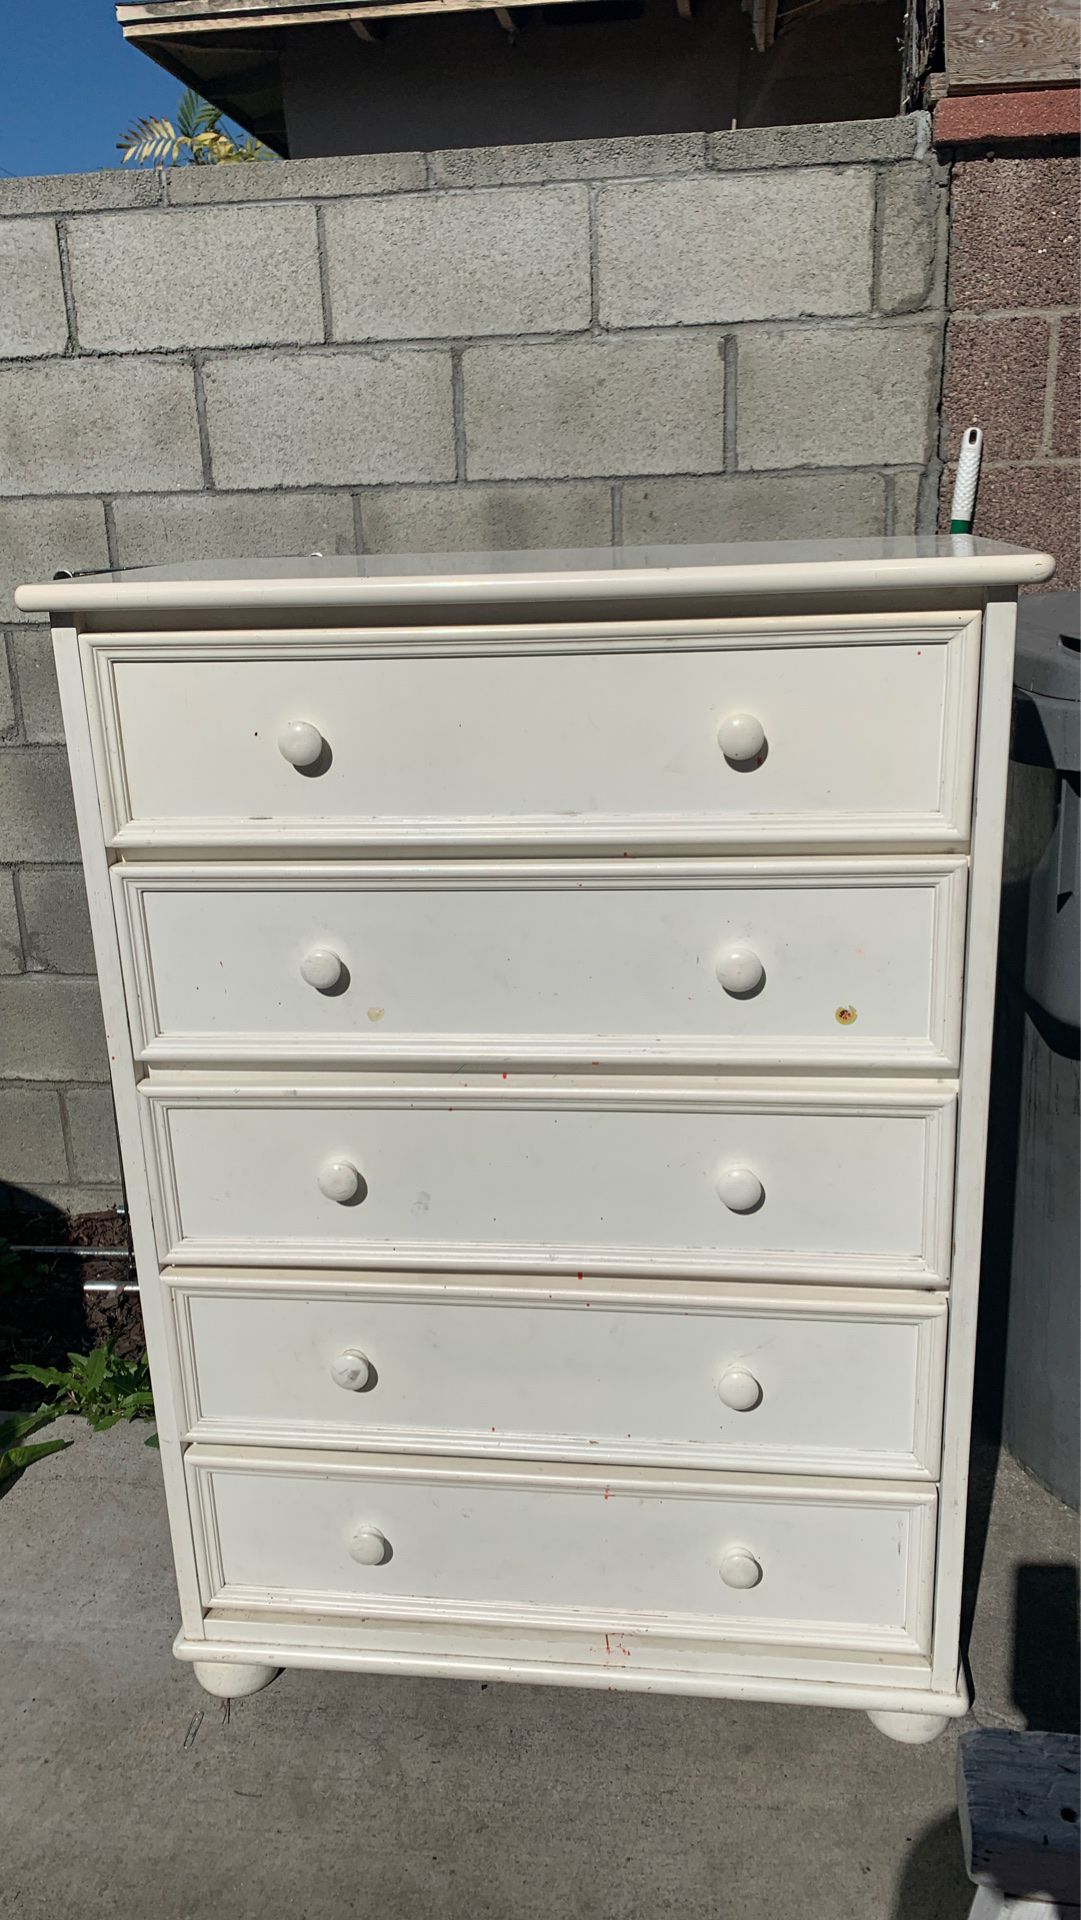 FREE Dresser *If Add is up, is still available*